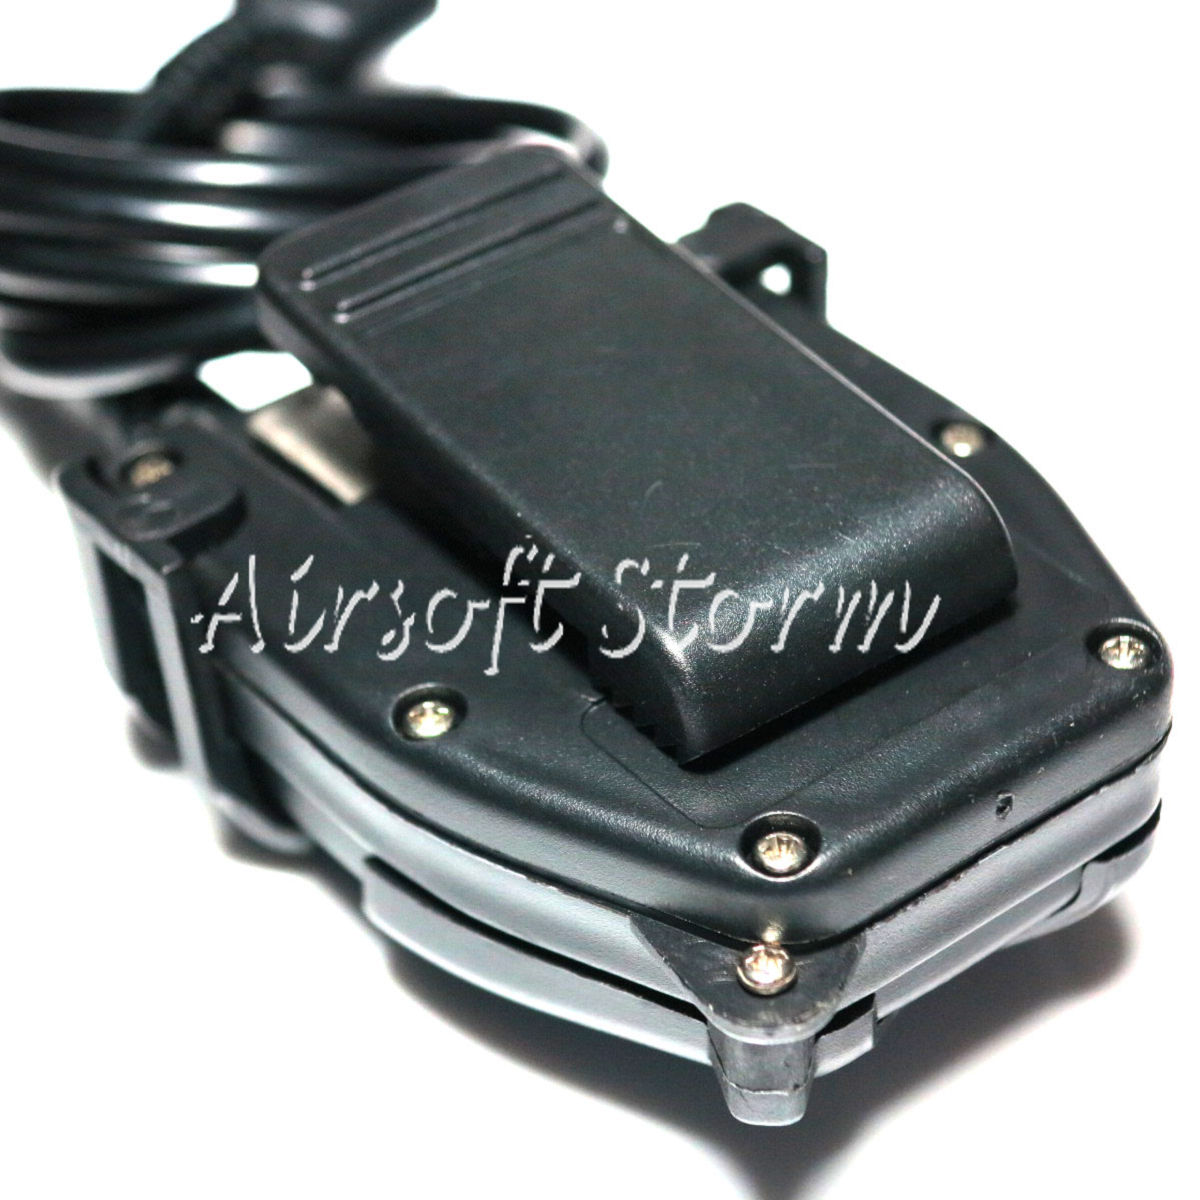 Airsoft SWAT Communications Gear Element Peltor Headset PTT for Yaesu Radio - Click Image to Close